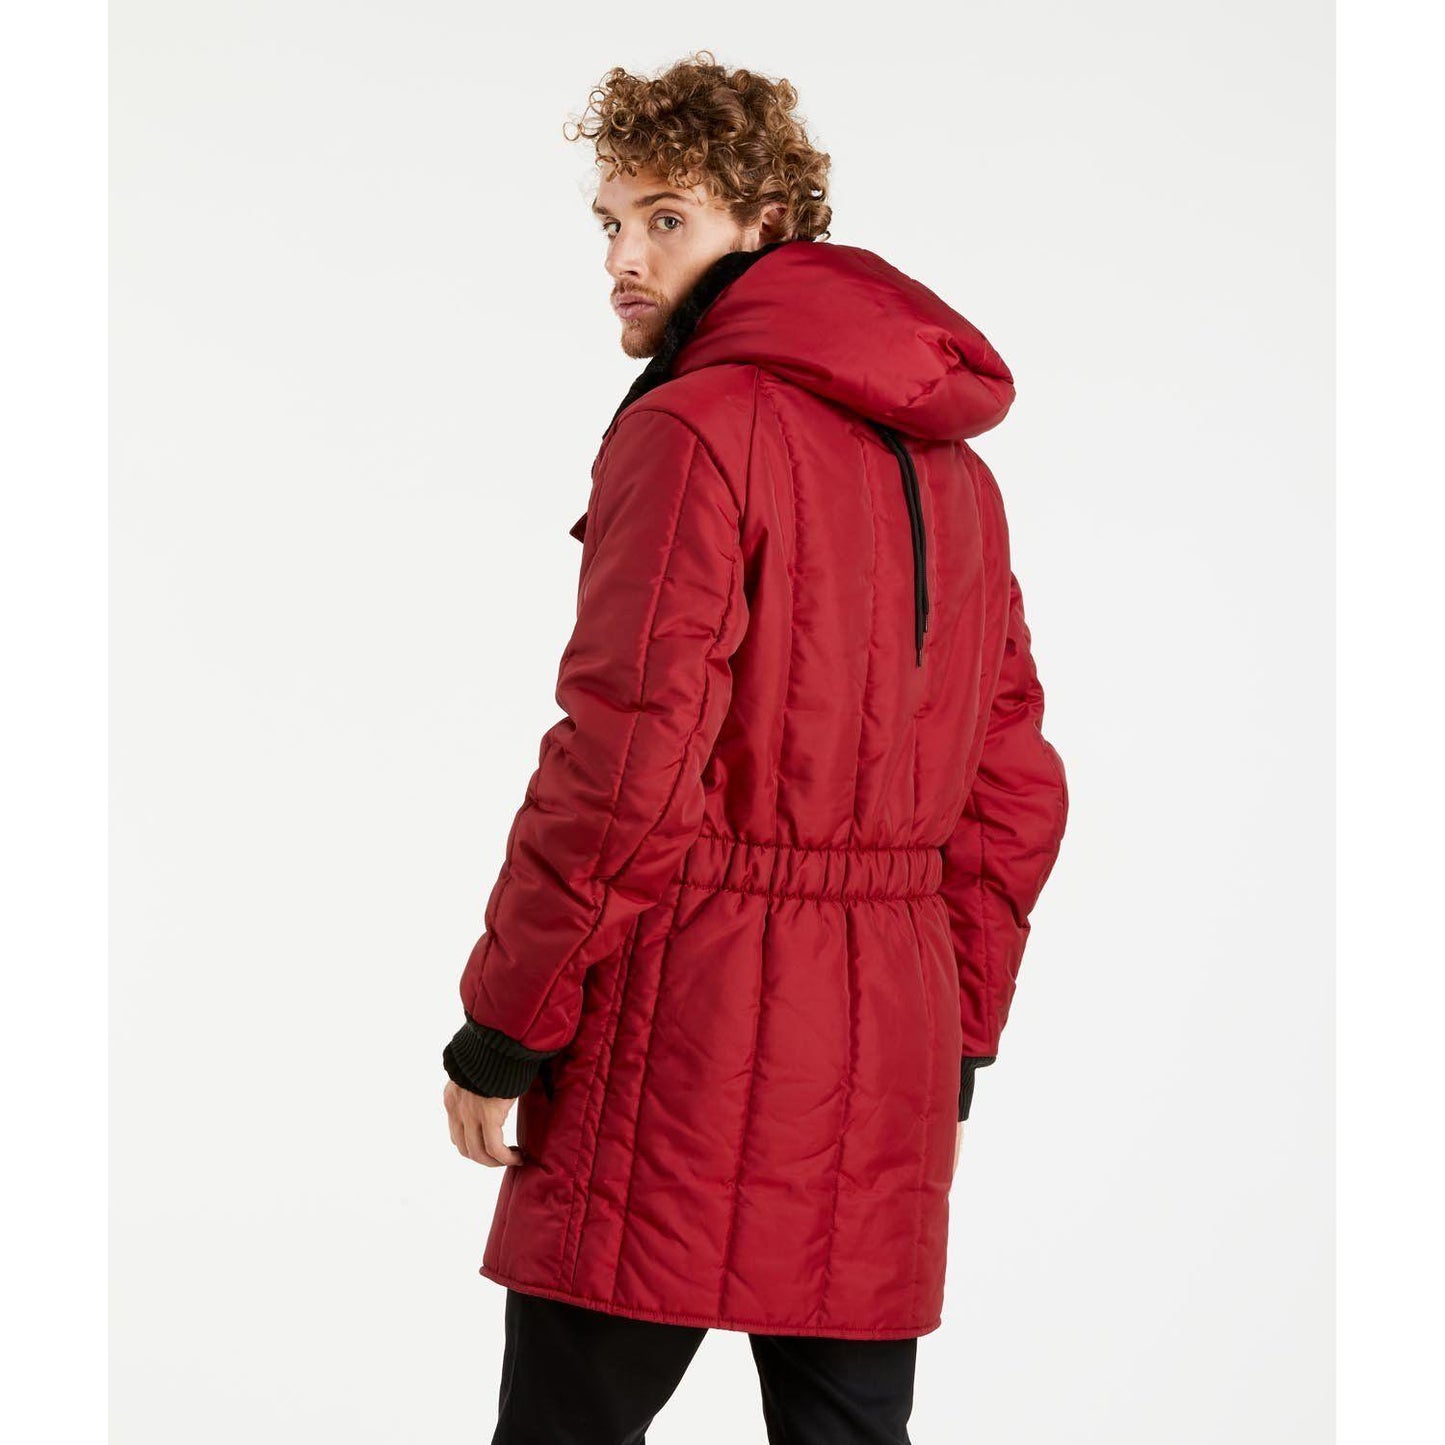 Refrigiwear Iconic Original Pink Parka for the Stylish Man iconic-original-pink-parka-for-the-stylish-man